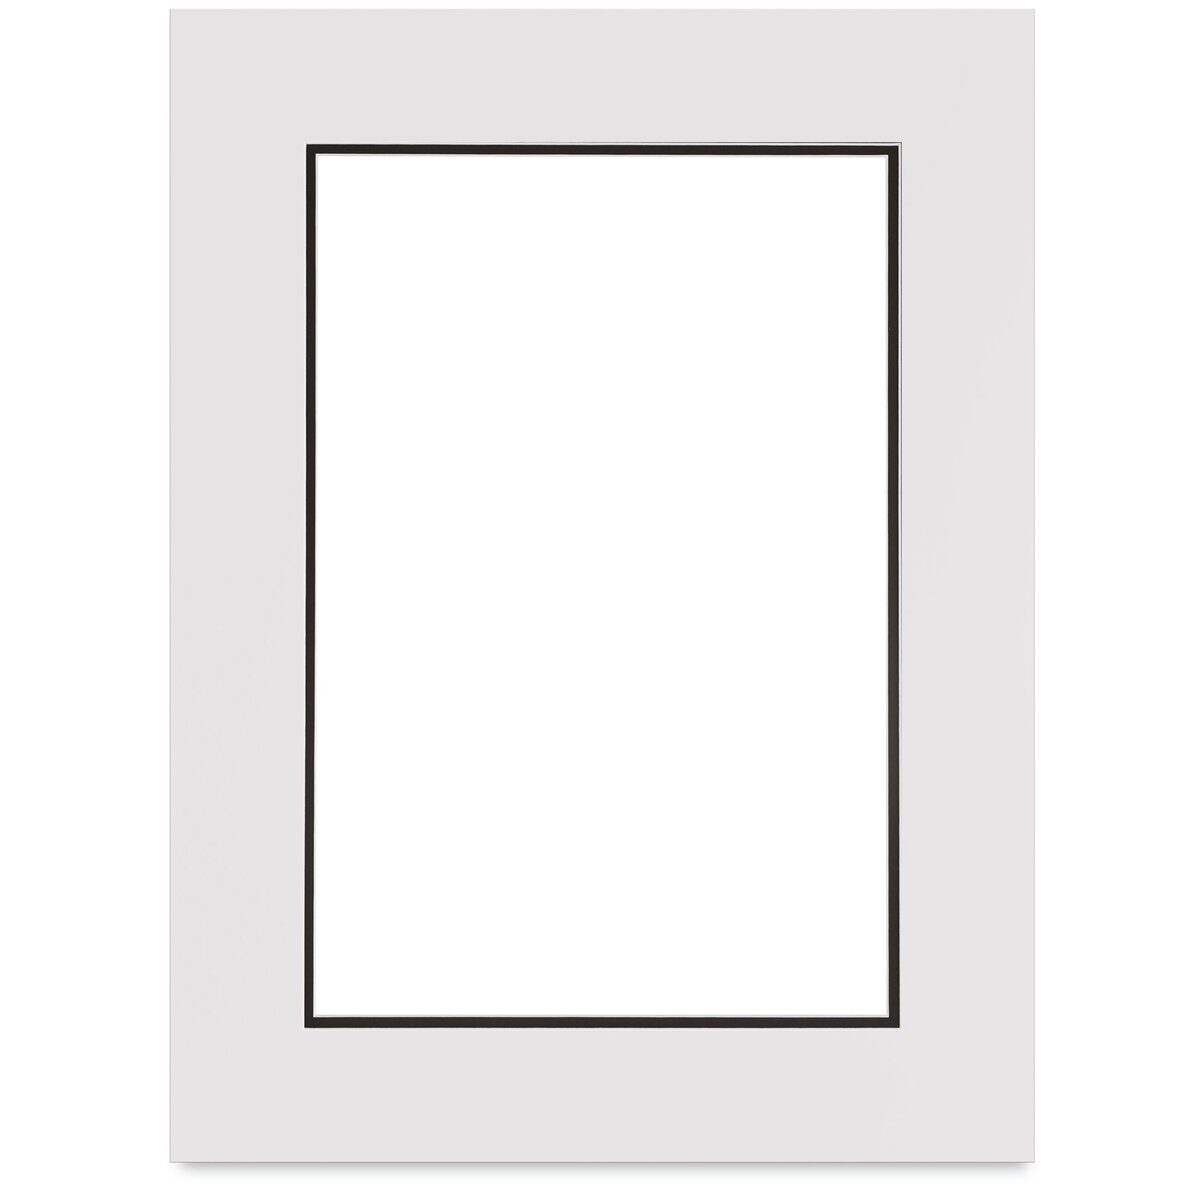 18x24 Mat for 12x18 Photo - Charcoal Matboard for Frames Measuring 18 x 24  Inches - To Display Art Measuring 12 x 18 Inches - Bed Bath & Beyond -  38873265